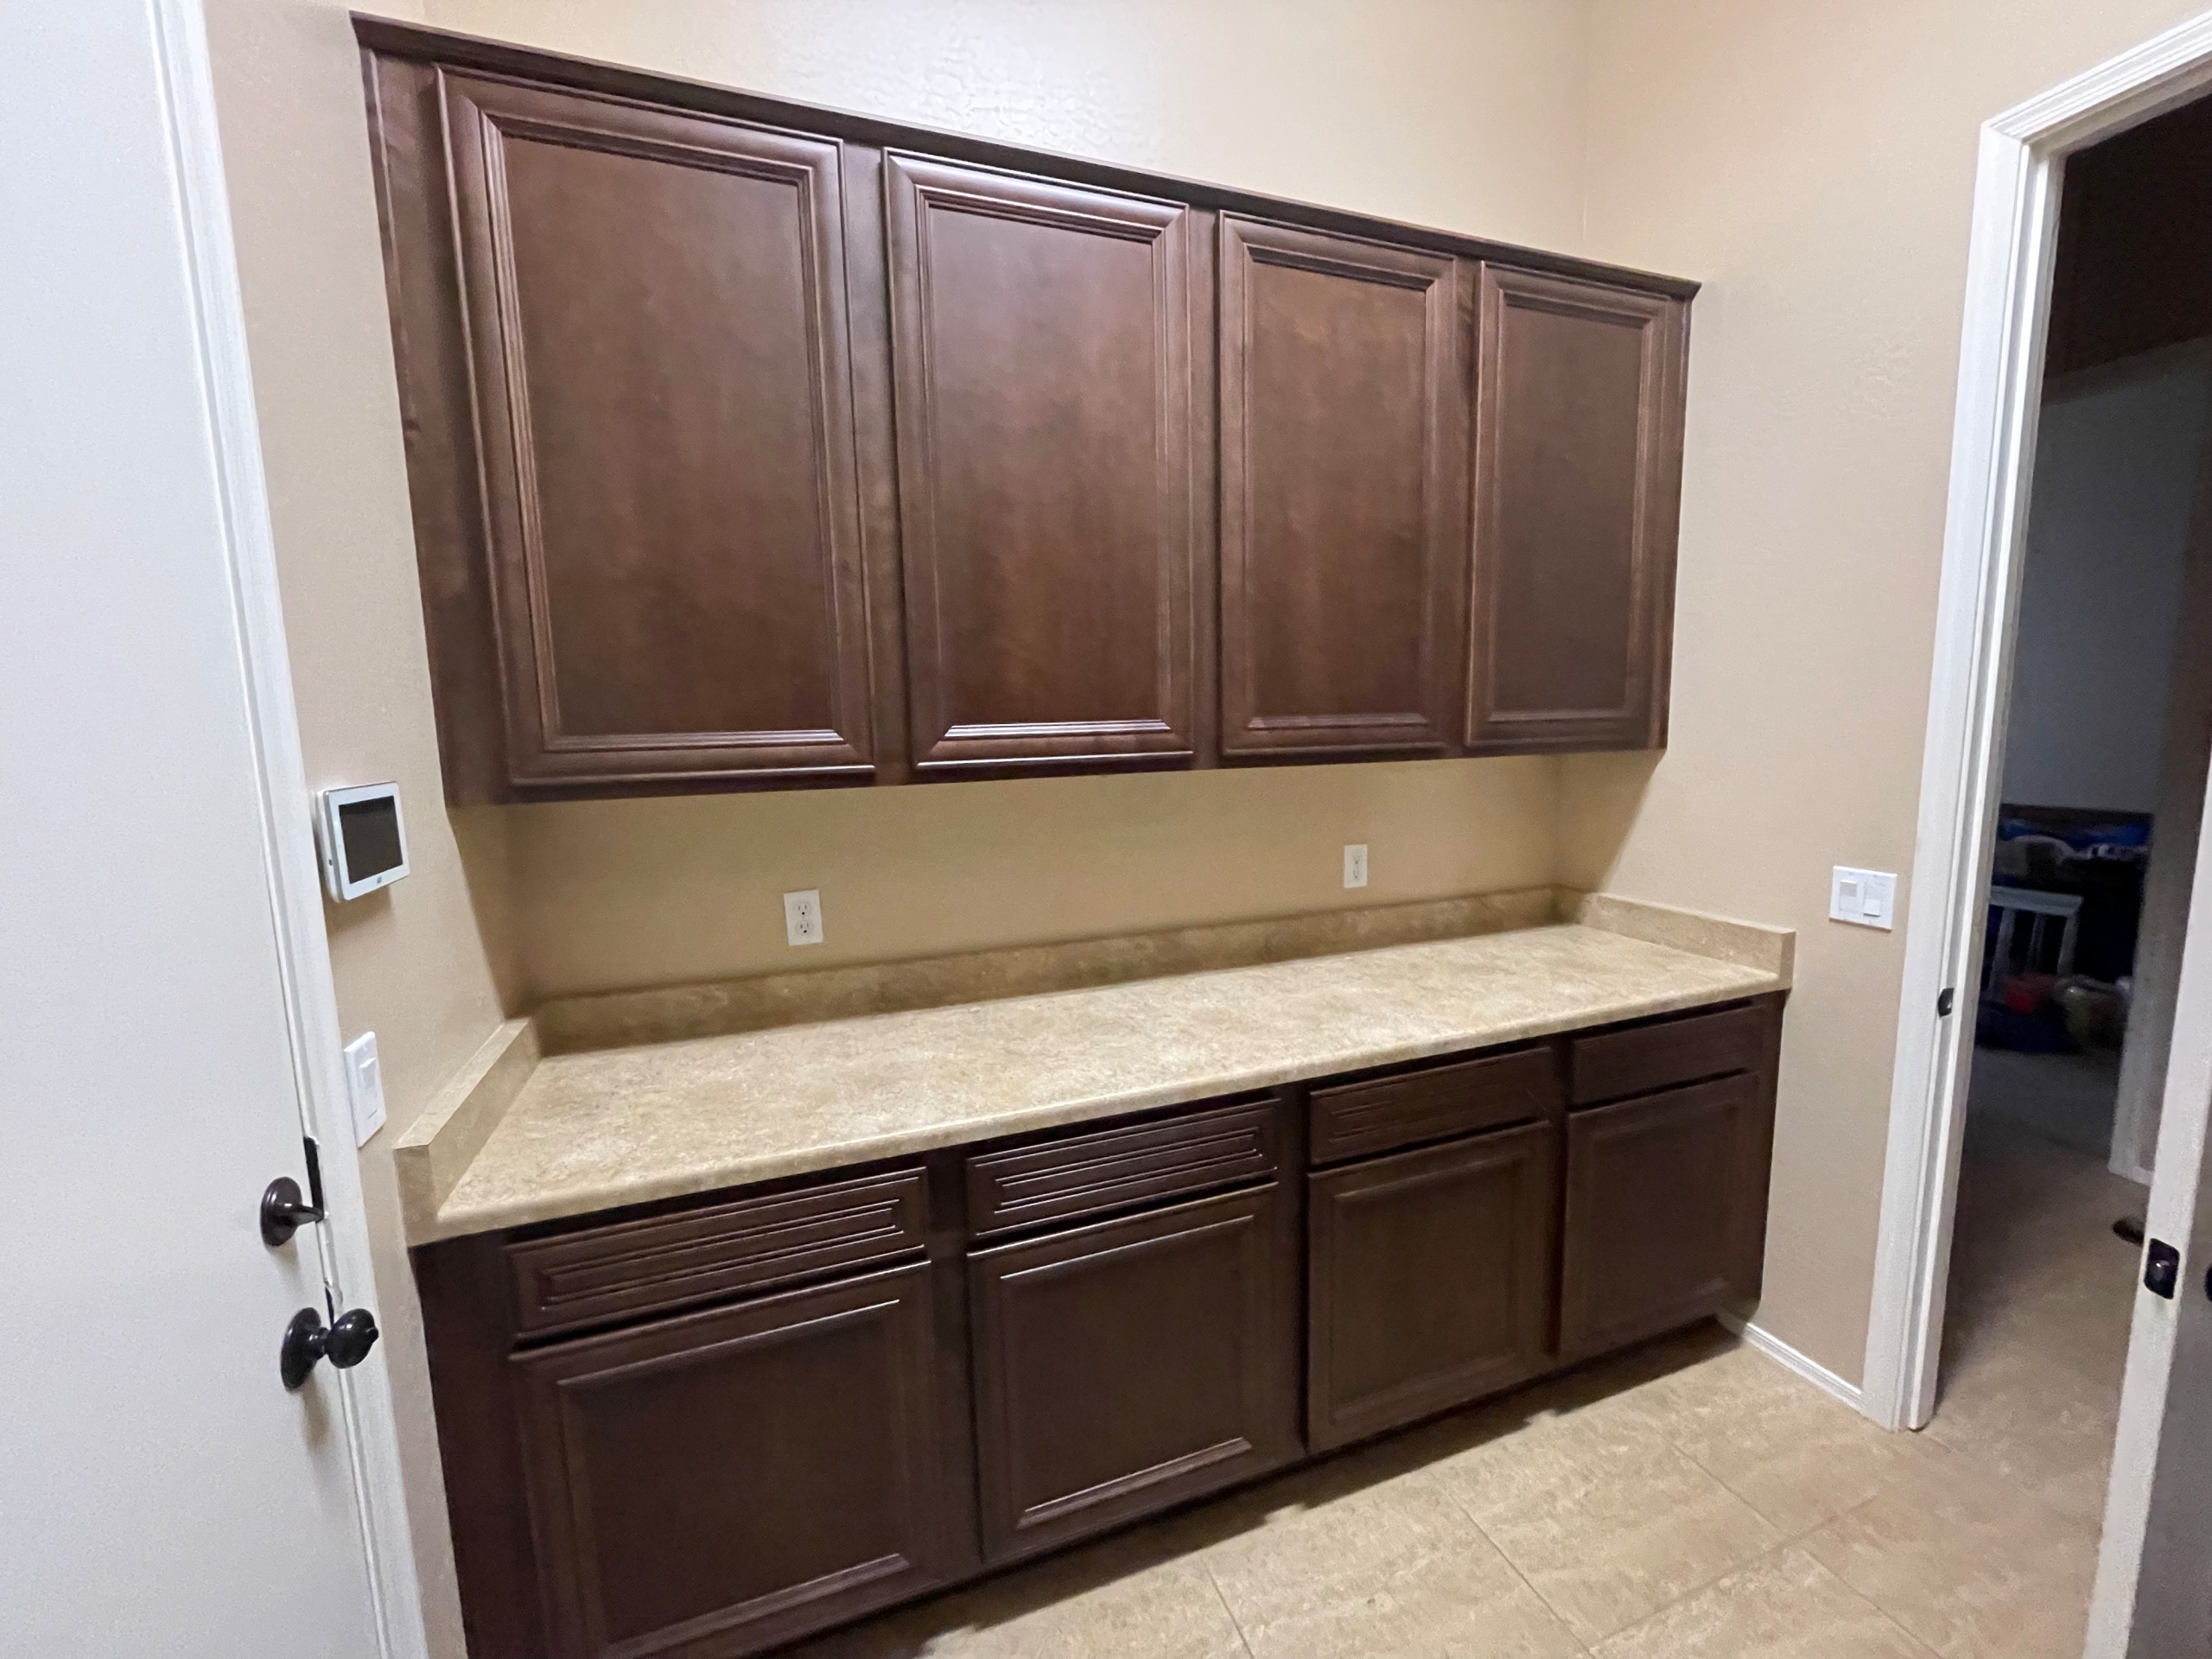 Kitchen, Laundry, and Bathroom Cabinetry Refinish